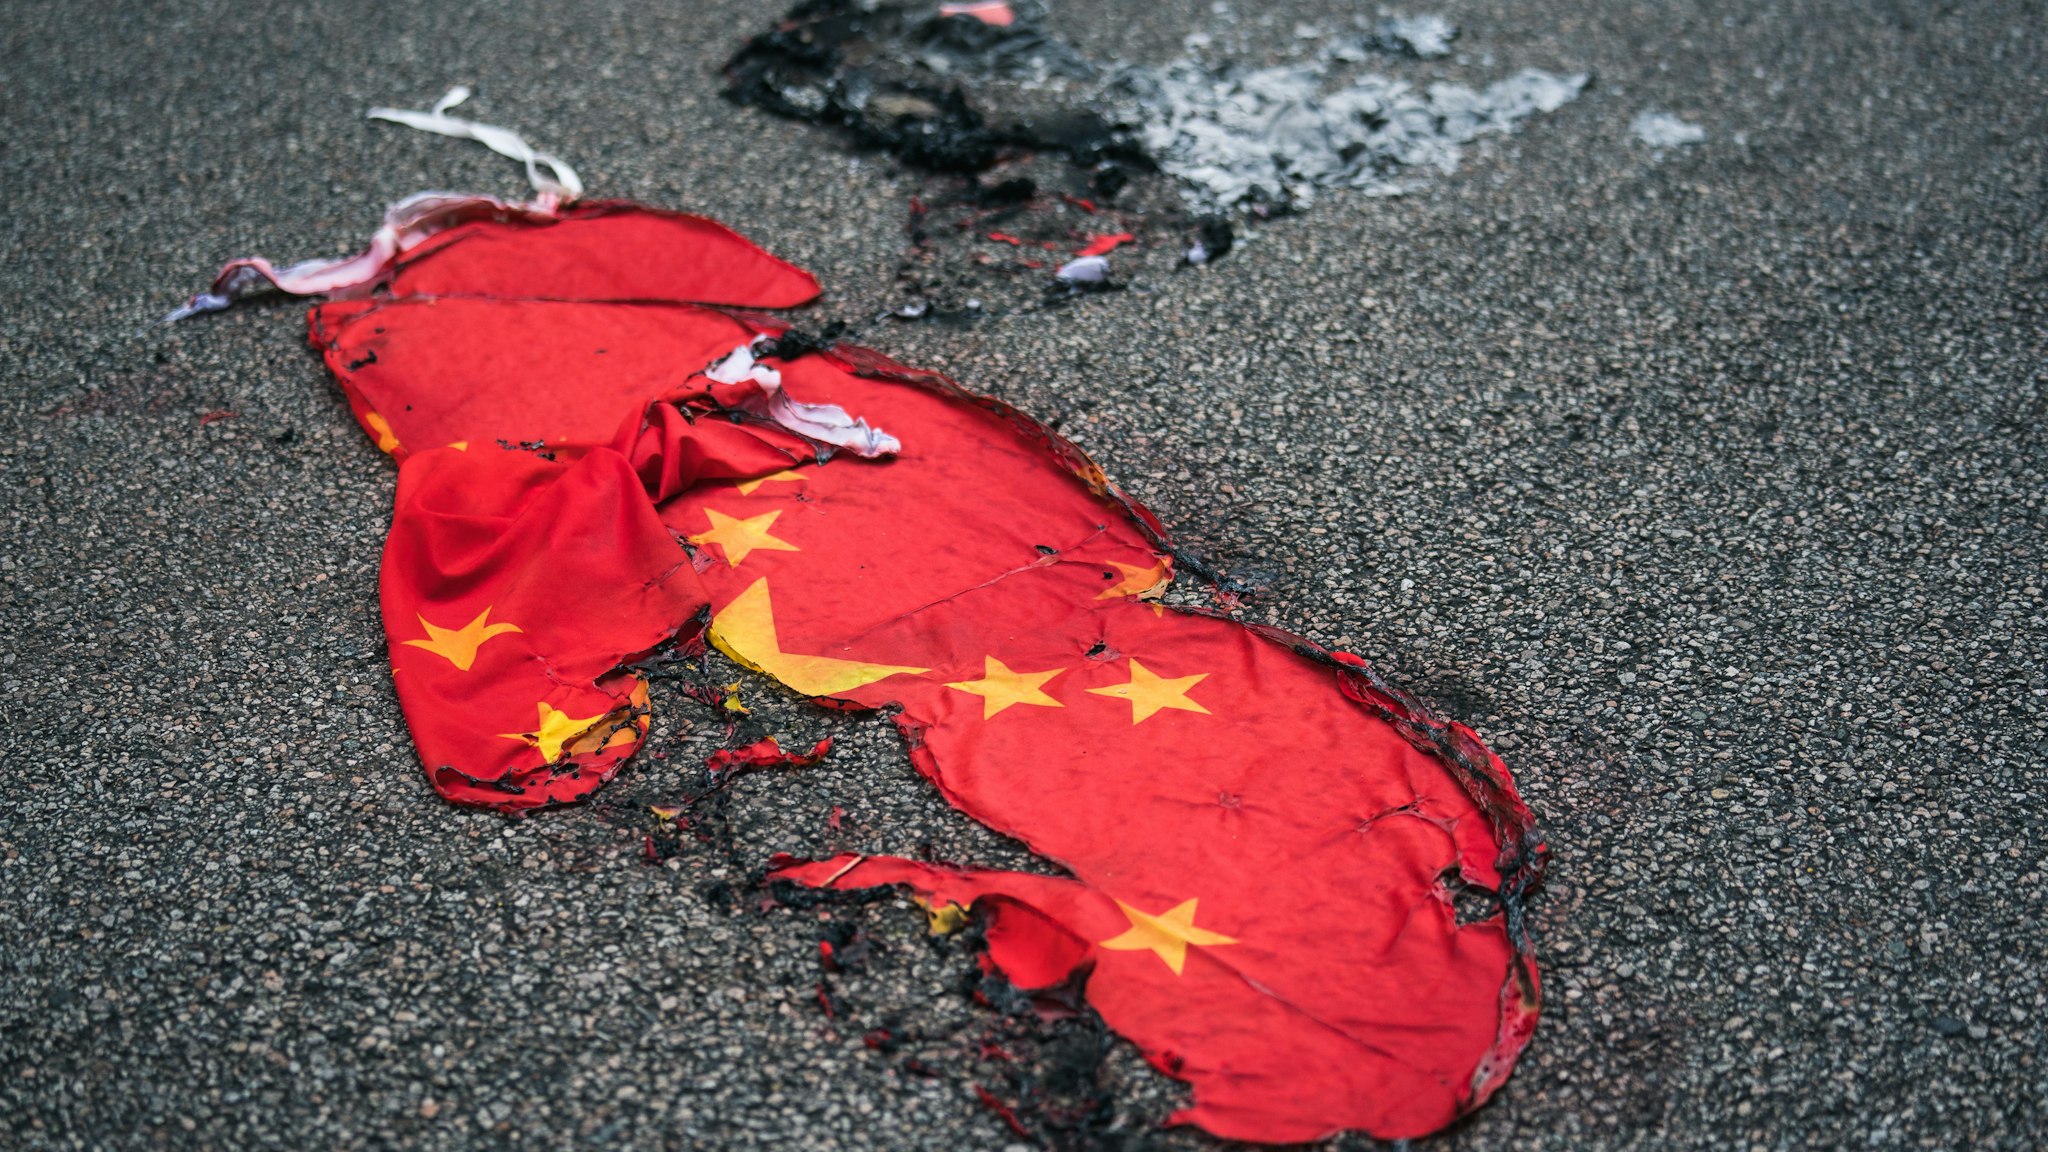 A Chinese national flag burnt on a street on October 01, 2019 in Hong Kong, China. Pro-democracy protesters marked the 70th anniversary of the founding of the People's Republic of China in Hong Kong through demonstrations as the city remains on the edge with the anti-government movement entering its fourth month. Protesters in Hong Kong continued their call for Chief Executive Carrie Lam to meet their remaining demands since the controversial extradition bill has been withdrawn, which includes an independent inquiry into police brutality, the retraction of the word “riot” to describe the rallies, and genuine universal suffrage, as the territory faces a leadership crisis.